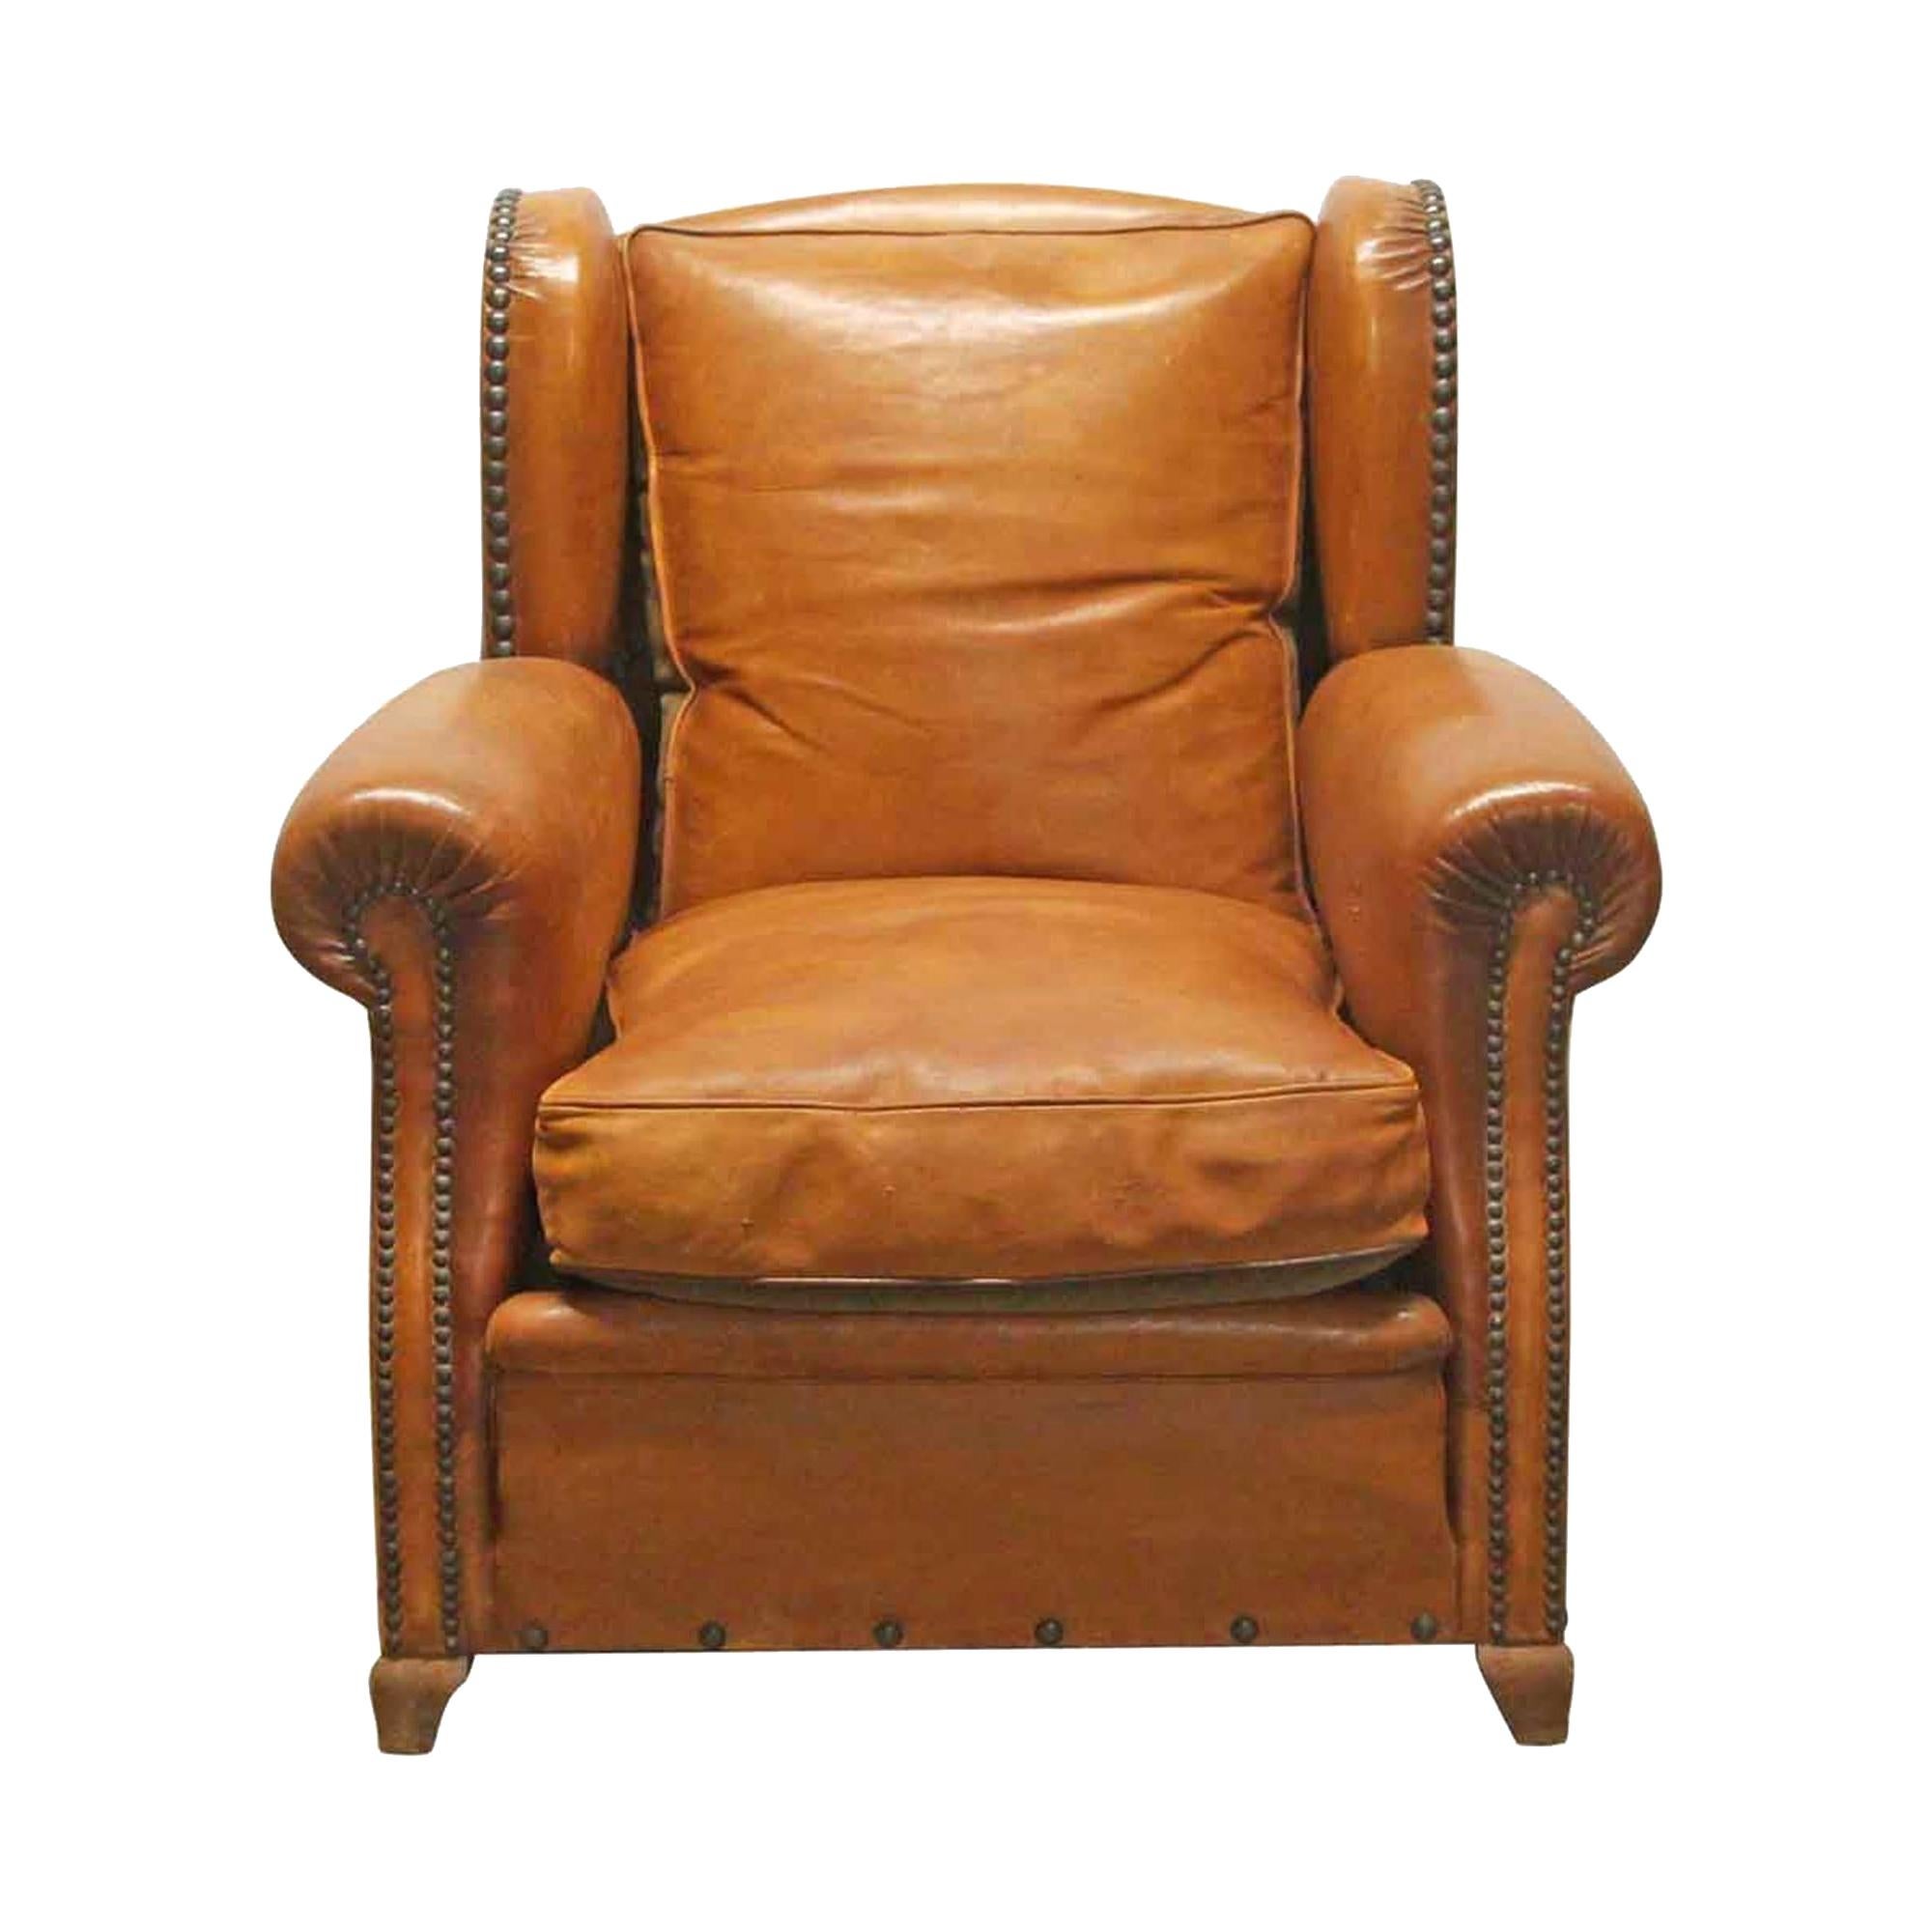 1980s Brown Leather Bergère Club Chair from France with Studded Details